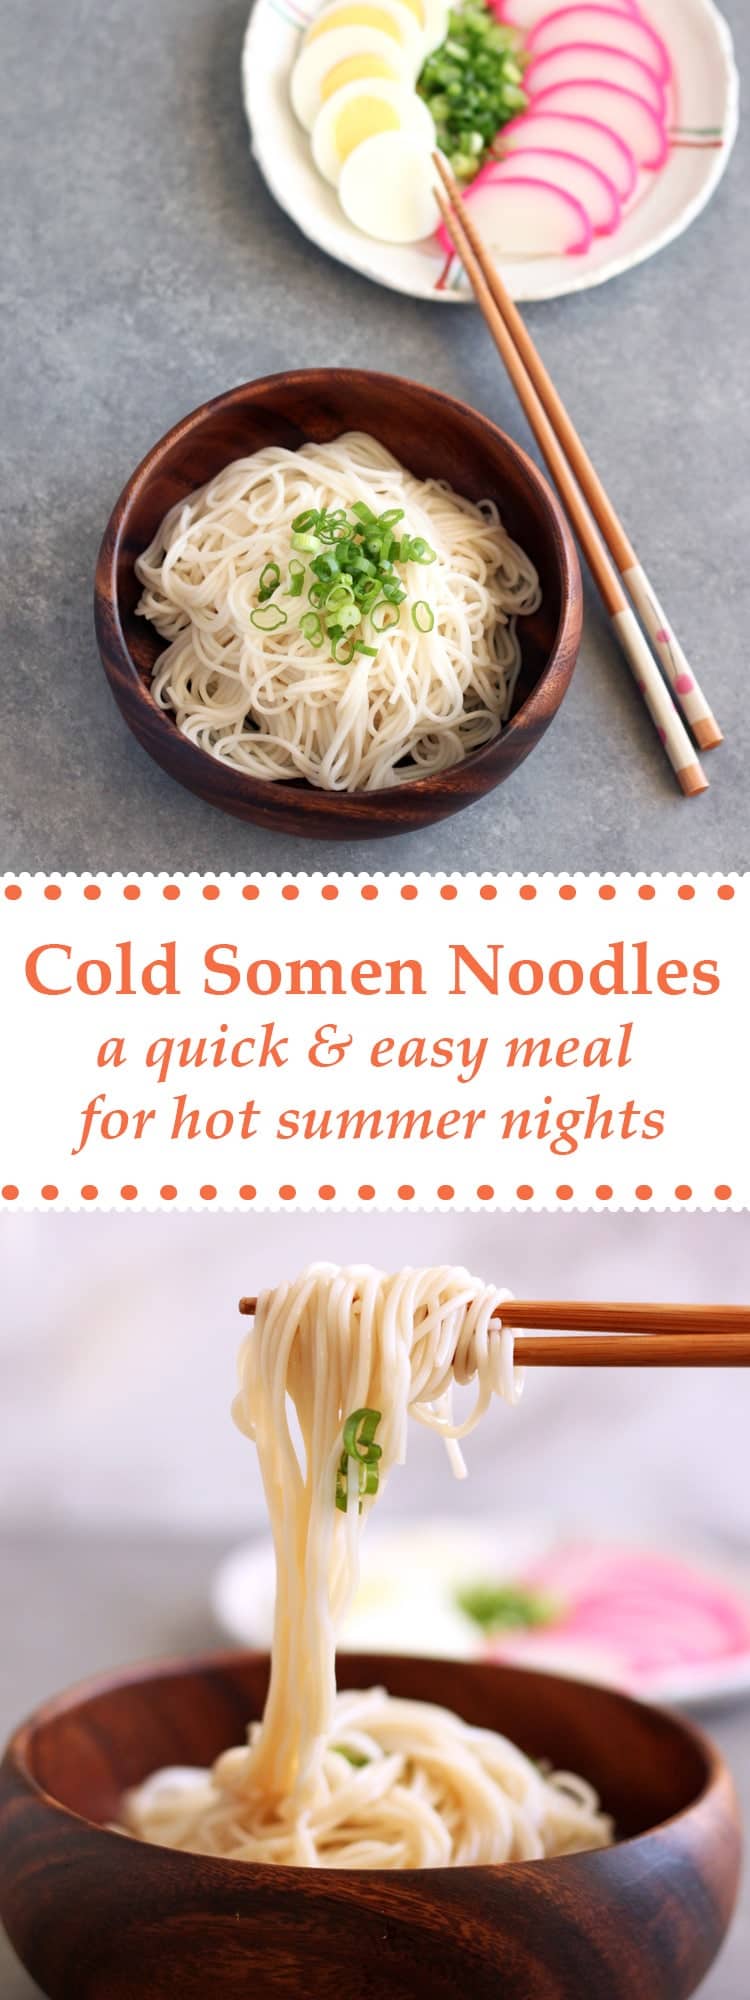 Cold Somen noodles make for a quick and easy meal during hot summer days. Customize the toppings with eggs, fish cake, cucumber, roasted seaweed, etc.